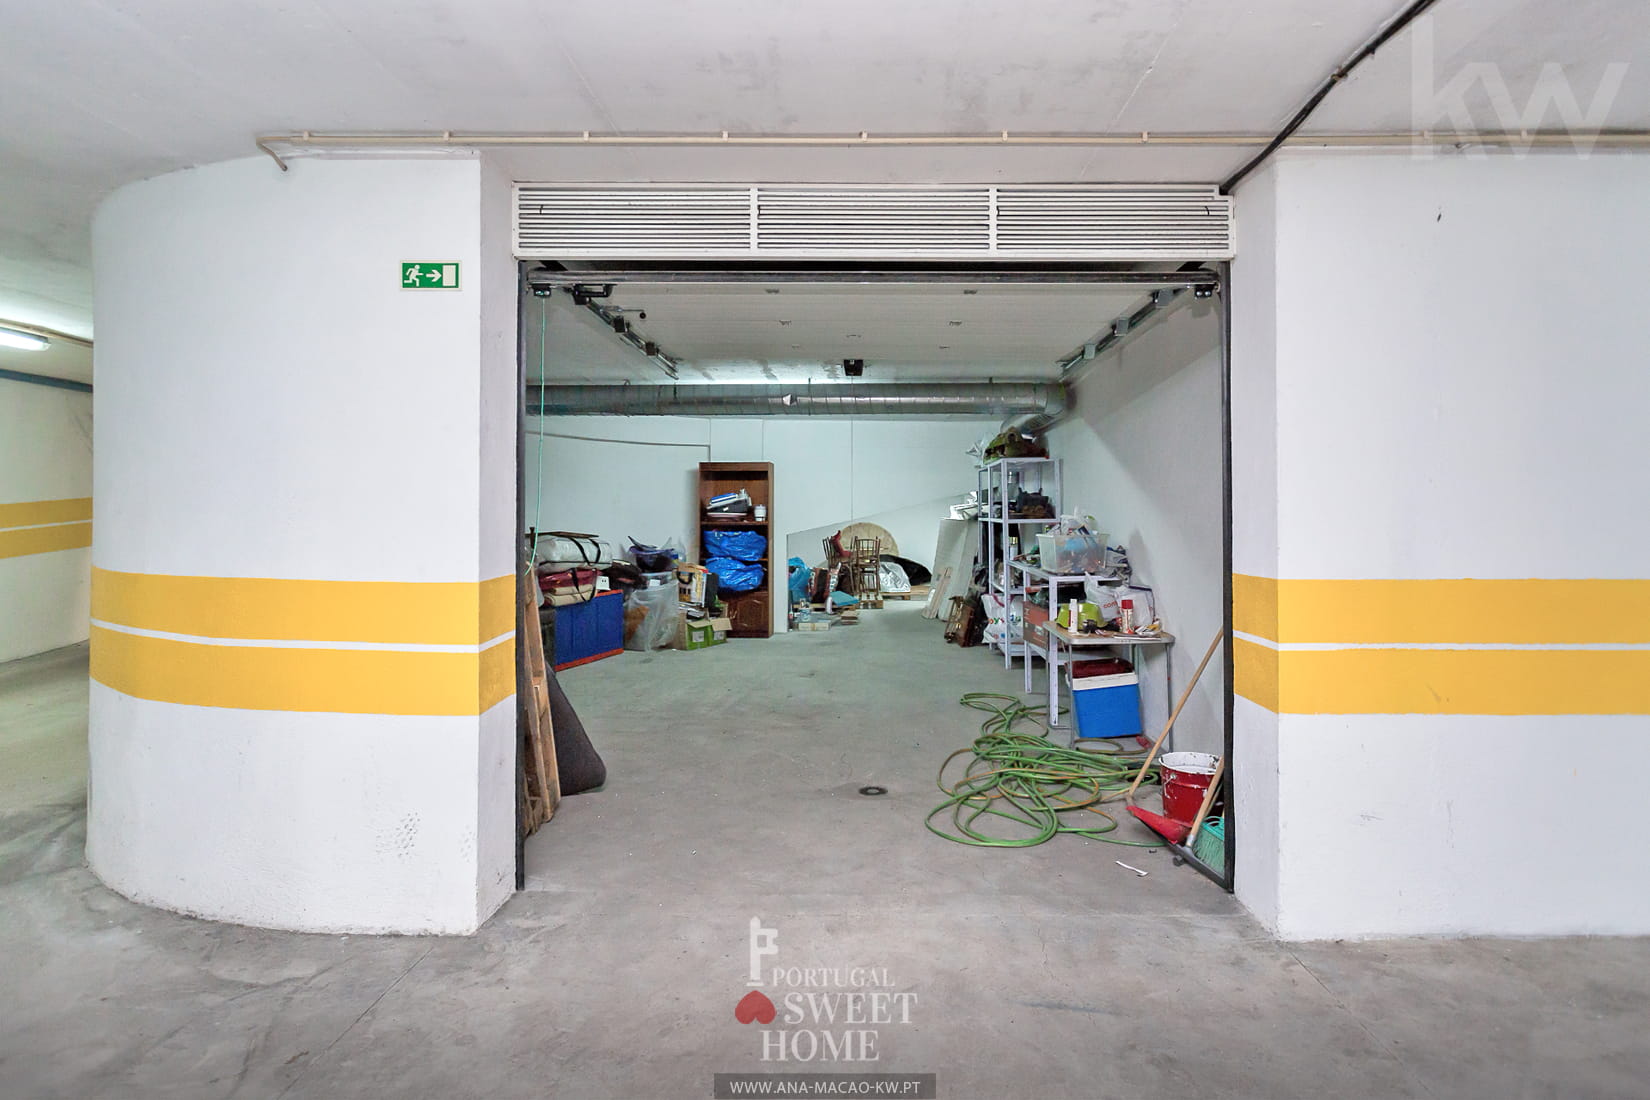 Closed garage for 2 cars (32.6 m2)